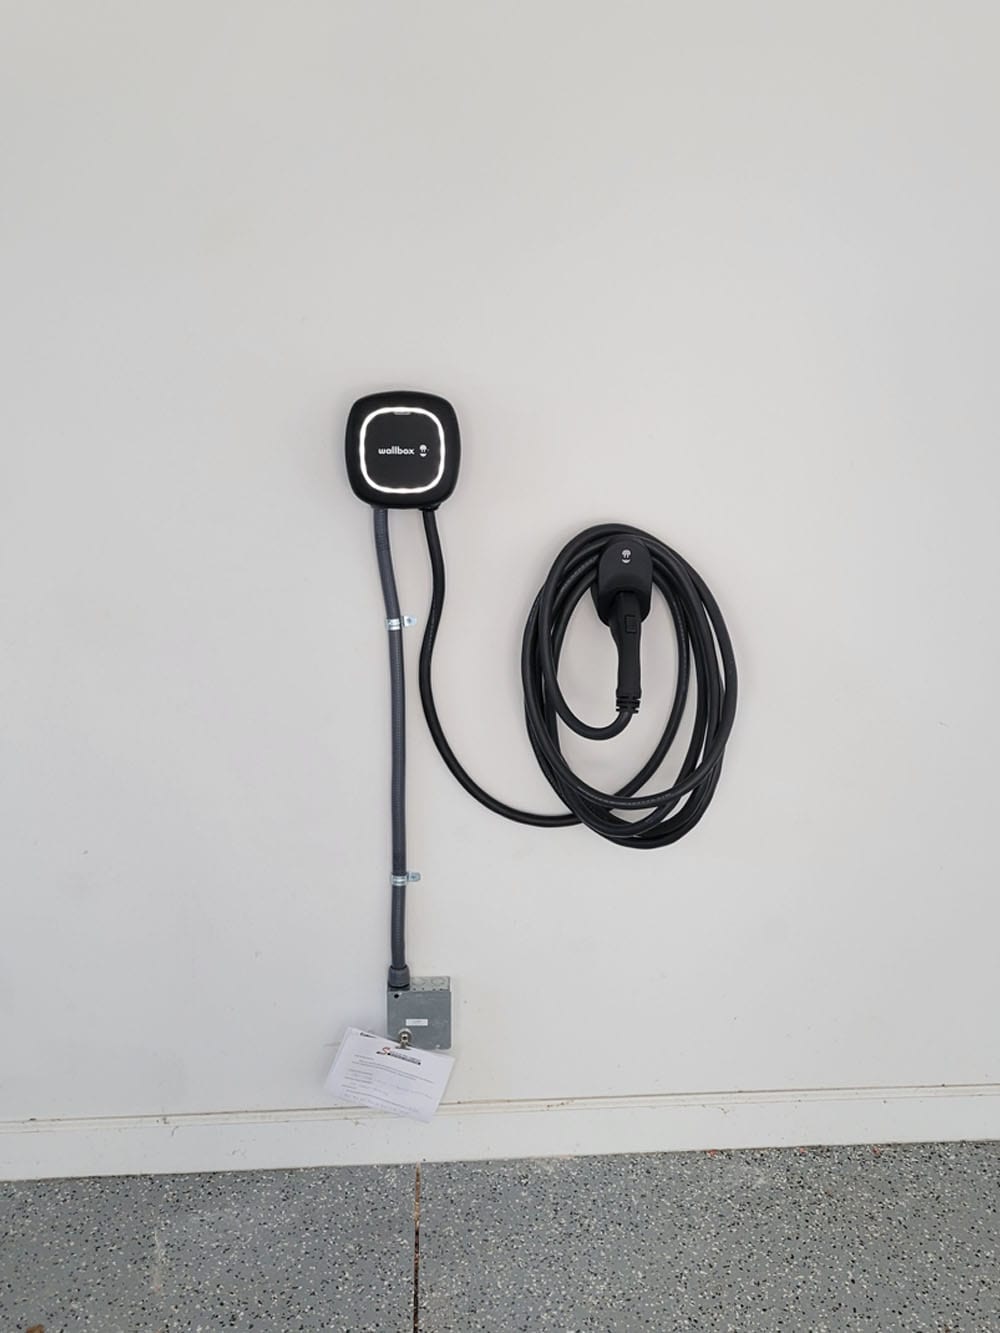 Wallbox EV Charger mounted on wall